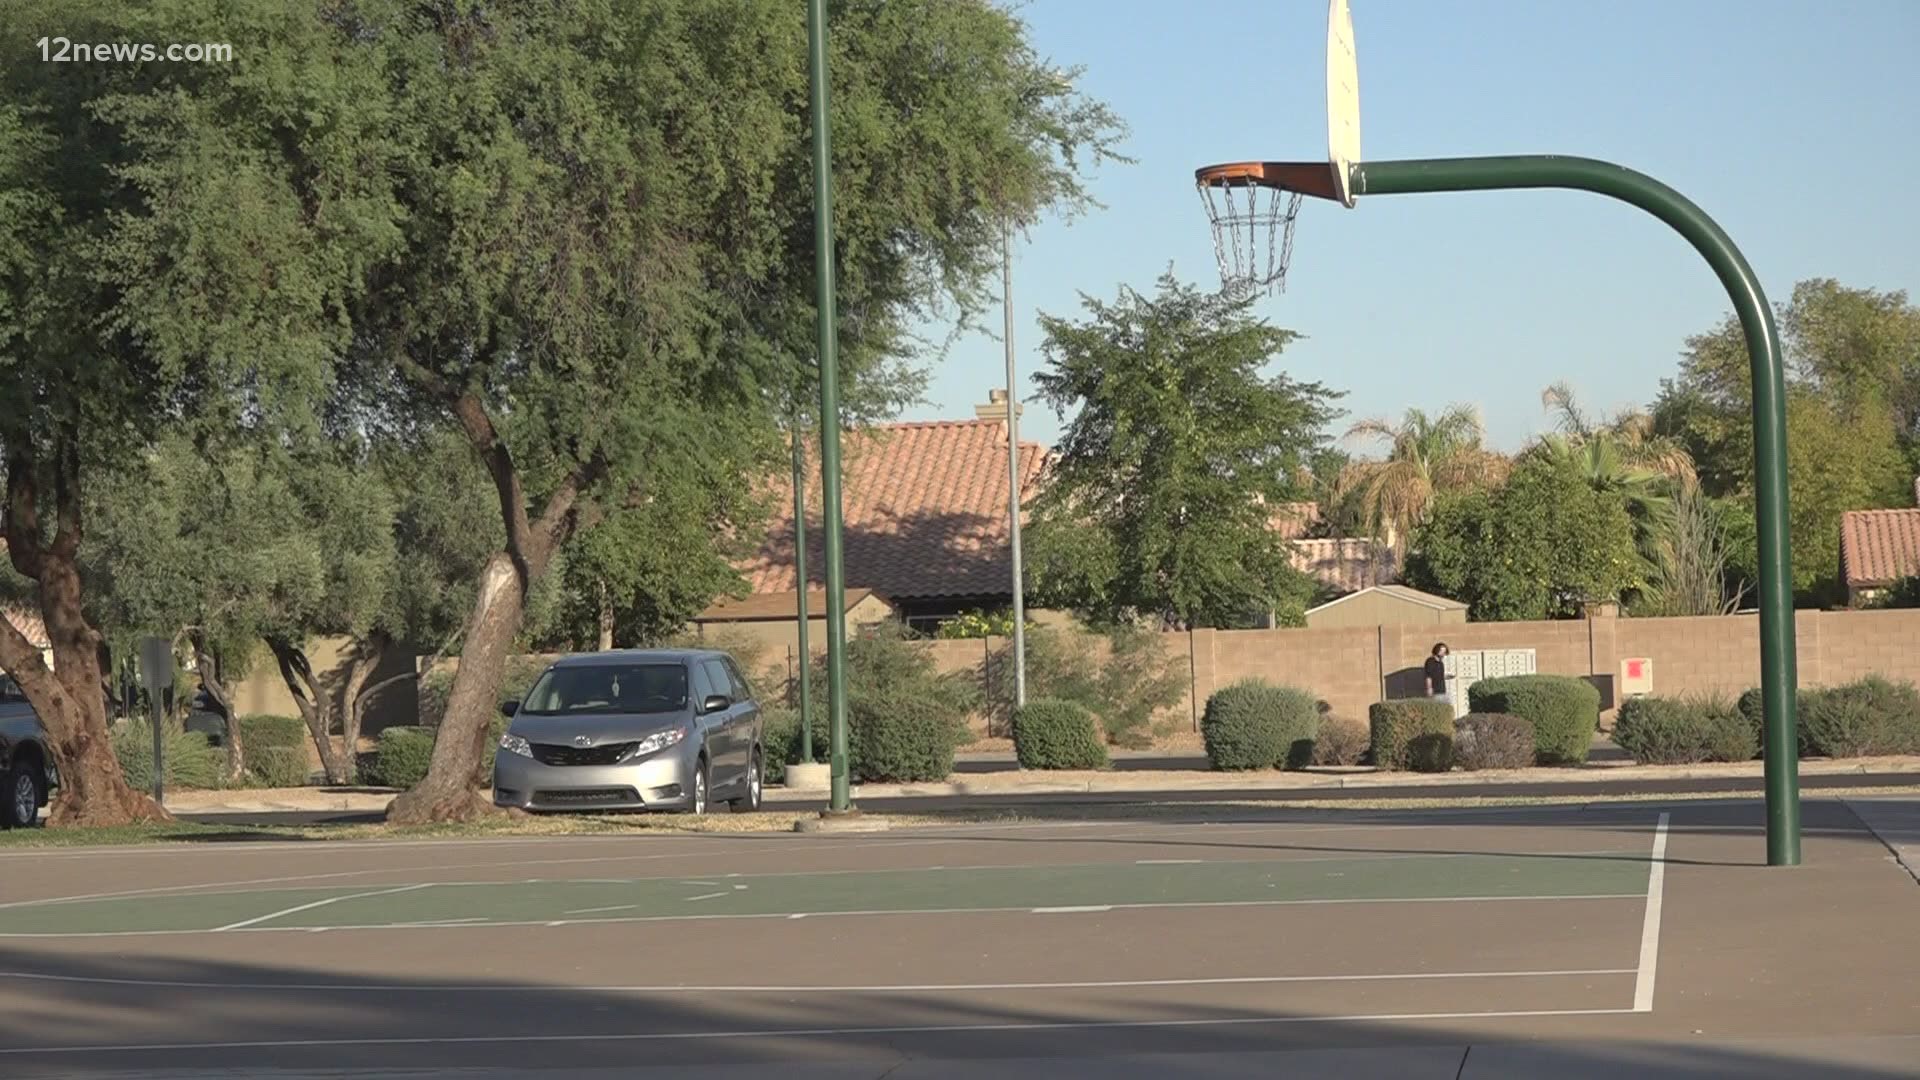 Nearly 800 teams are coming to the Valley to compete in a youth sports tournament this weekend. It's causing concerns as COVID-19 cases are on the rise in Arizona.